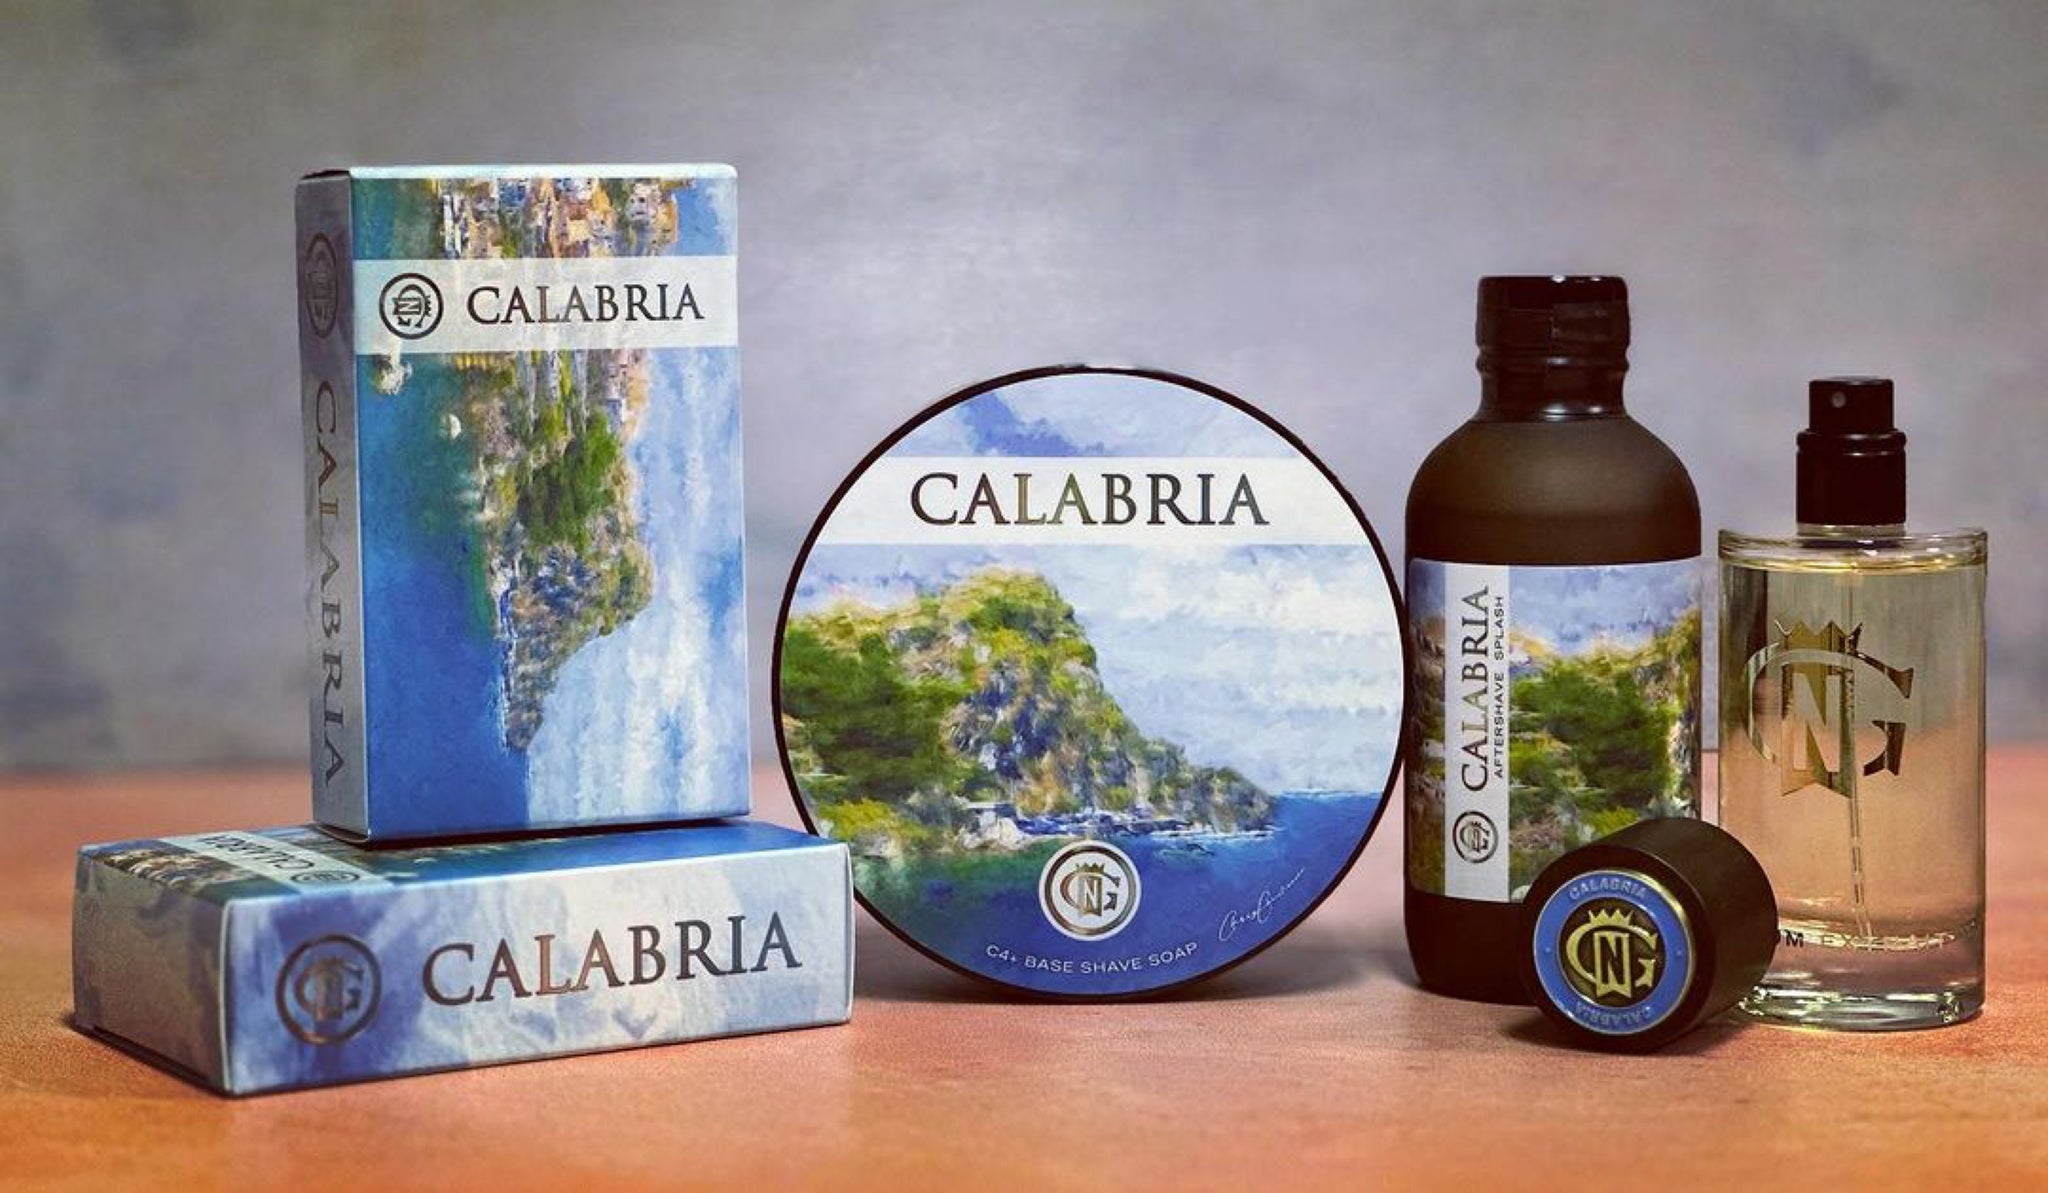 Calabria Parfum & Shave Gift Set (Trotter “Seaglass” #24 T1 Knot)